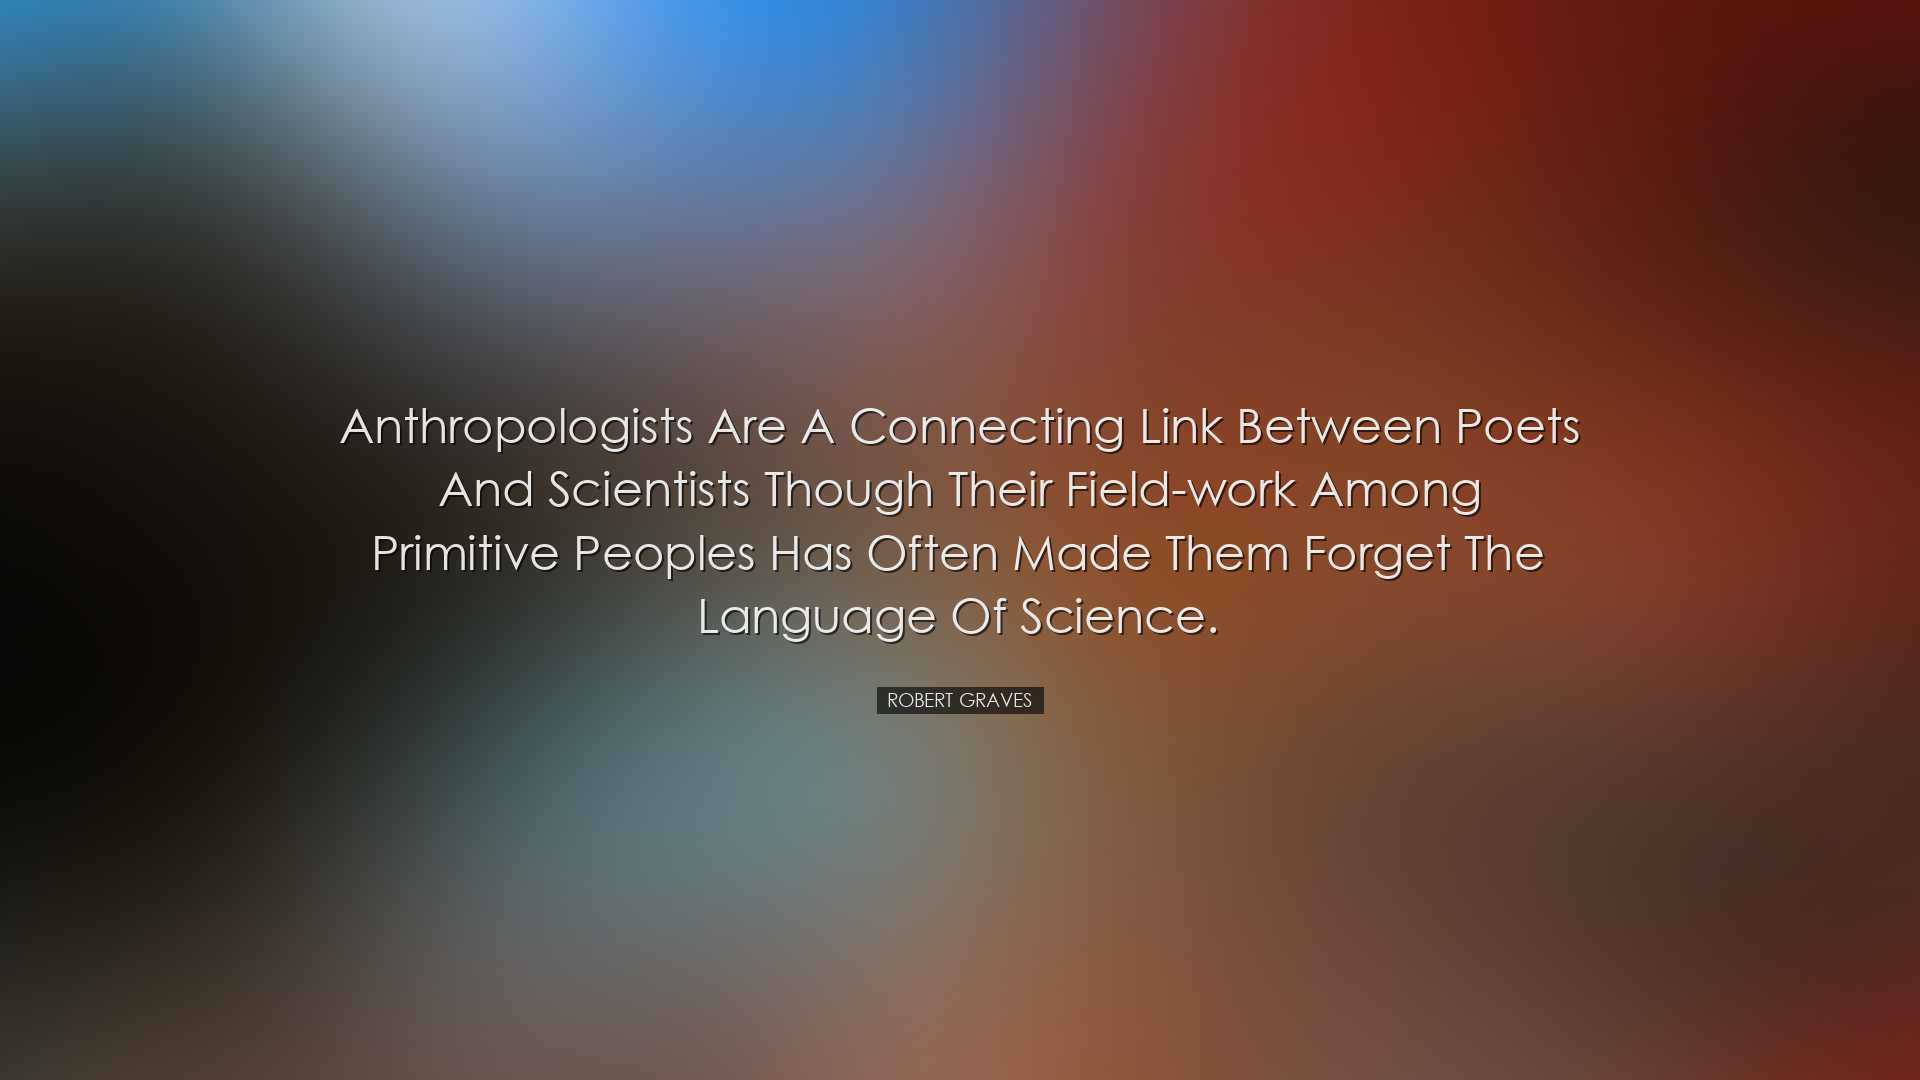 Anthropologists are a connecting link between poets and scientists